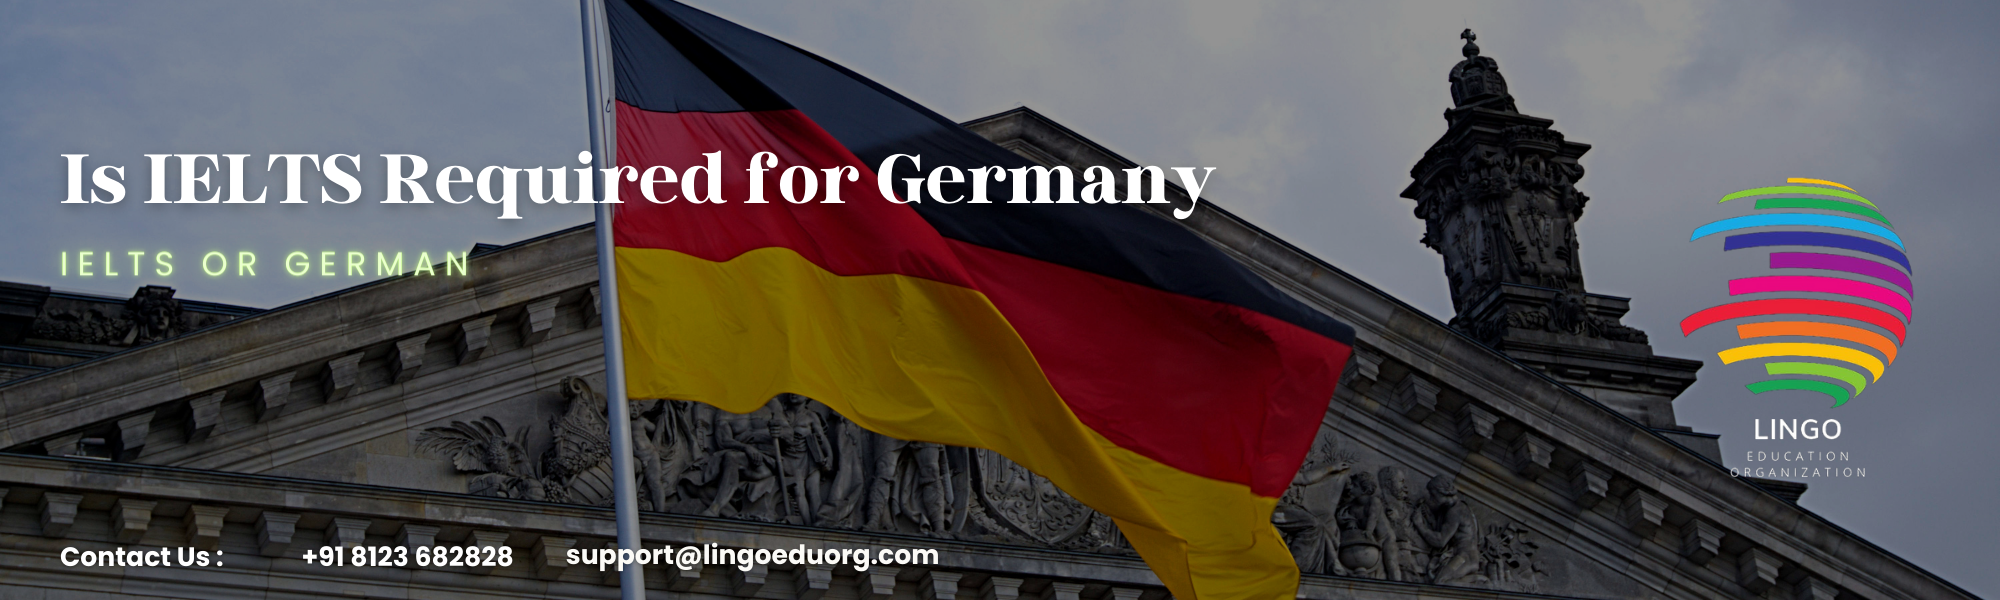 IS IELTS required for Germany?
